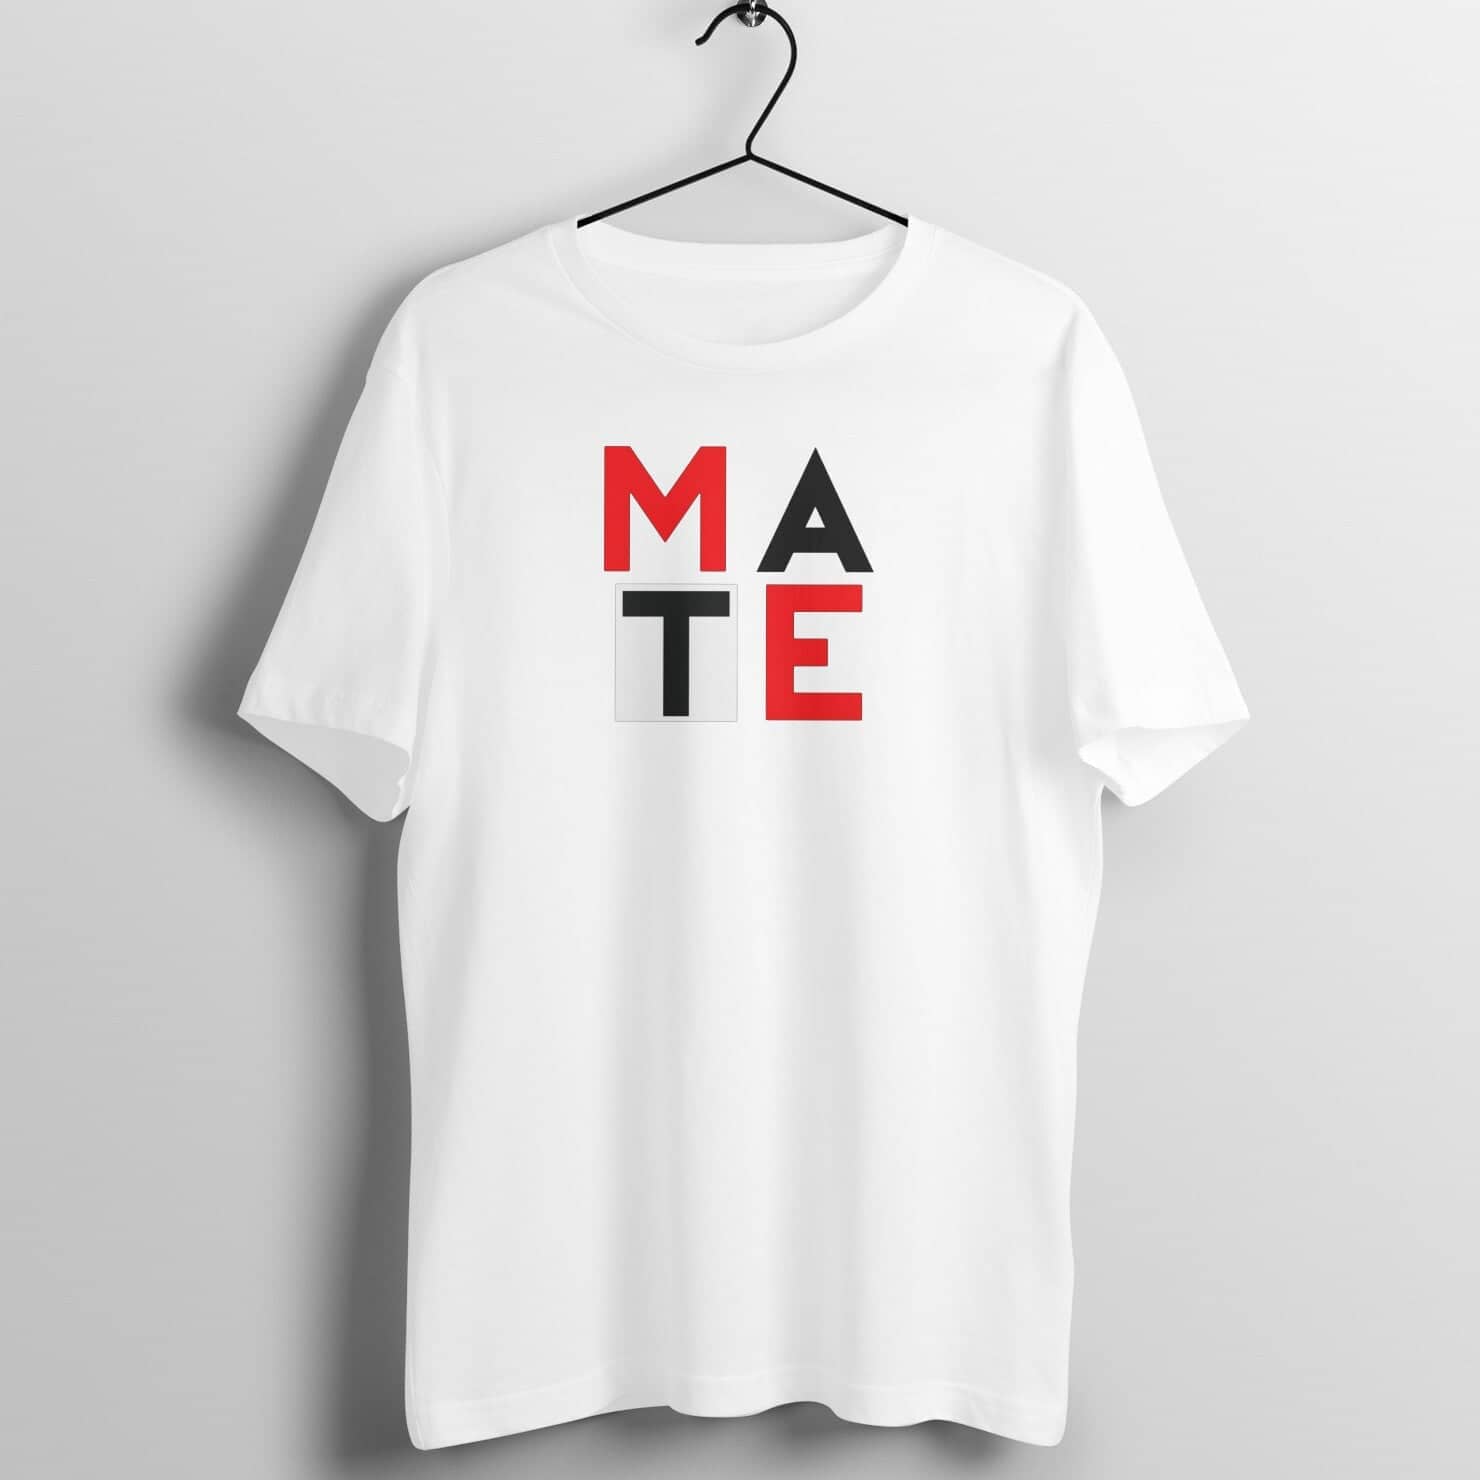 Mate Soulmate Special Matching Couples T Shirt for Men and Women Printrove White S 